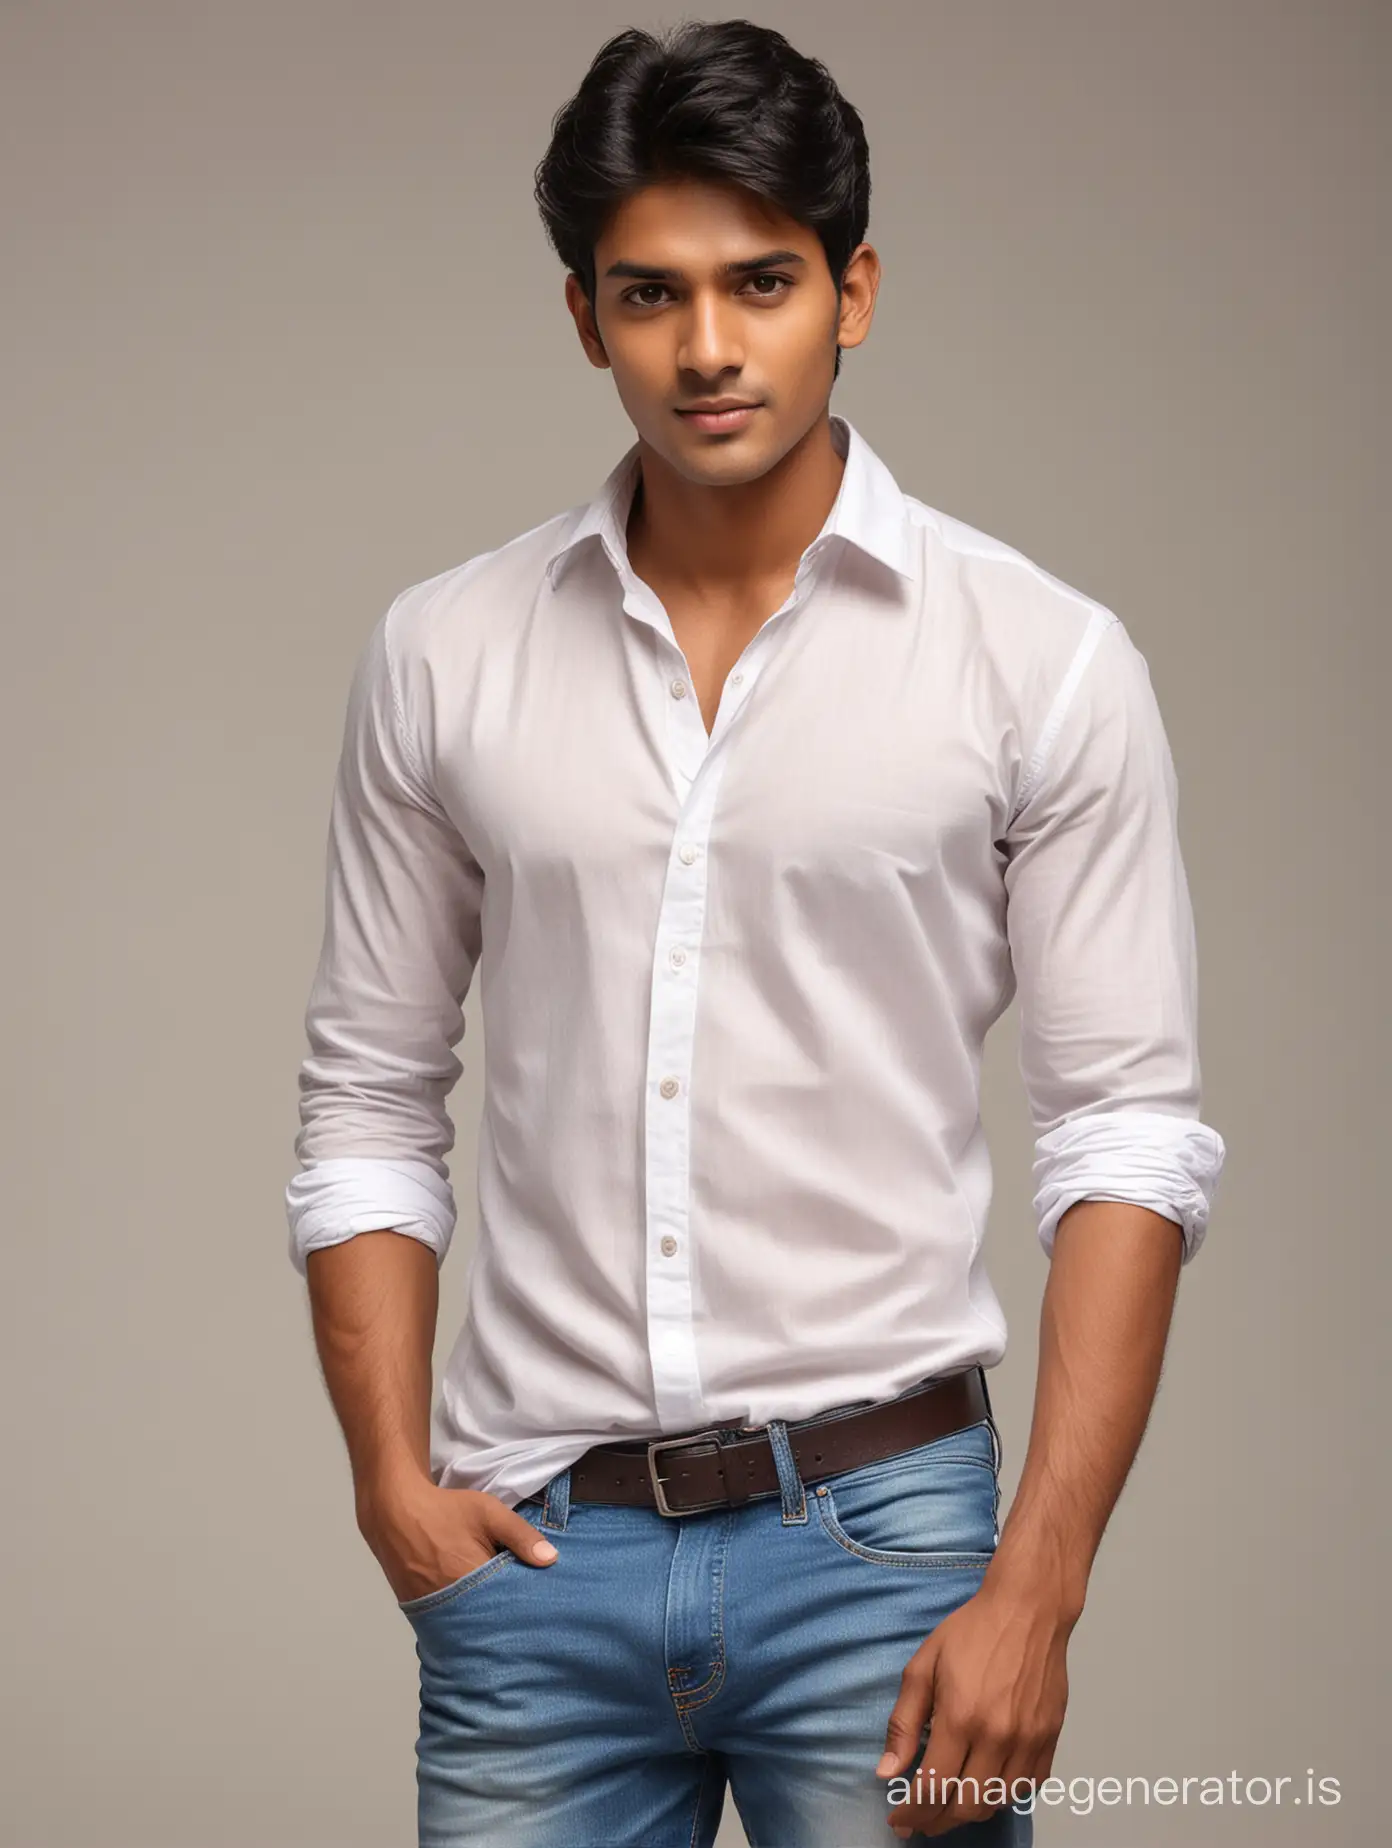 Handsome-Indian-Boy-in-Stylish-Cotton-Shirt-and-Jeans